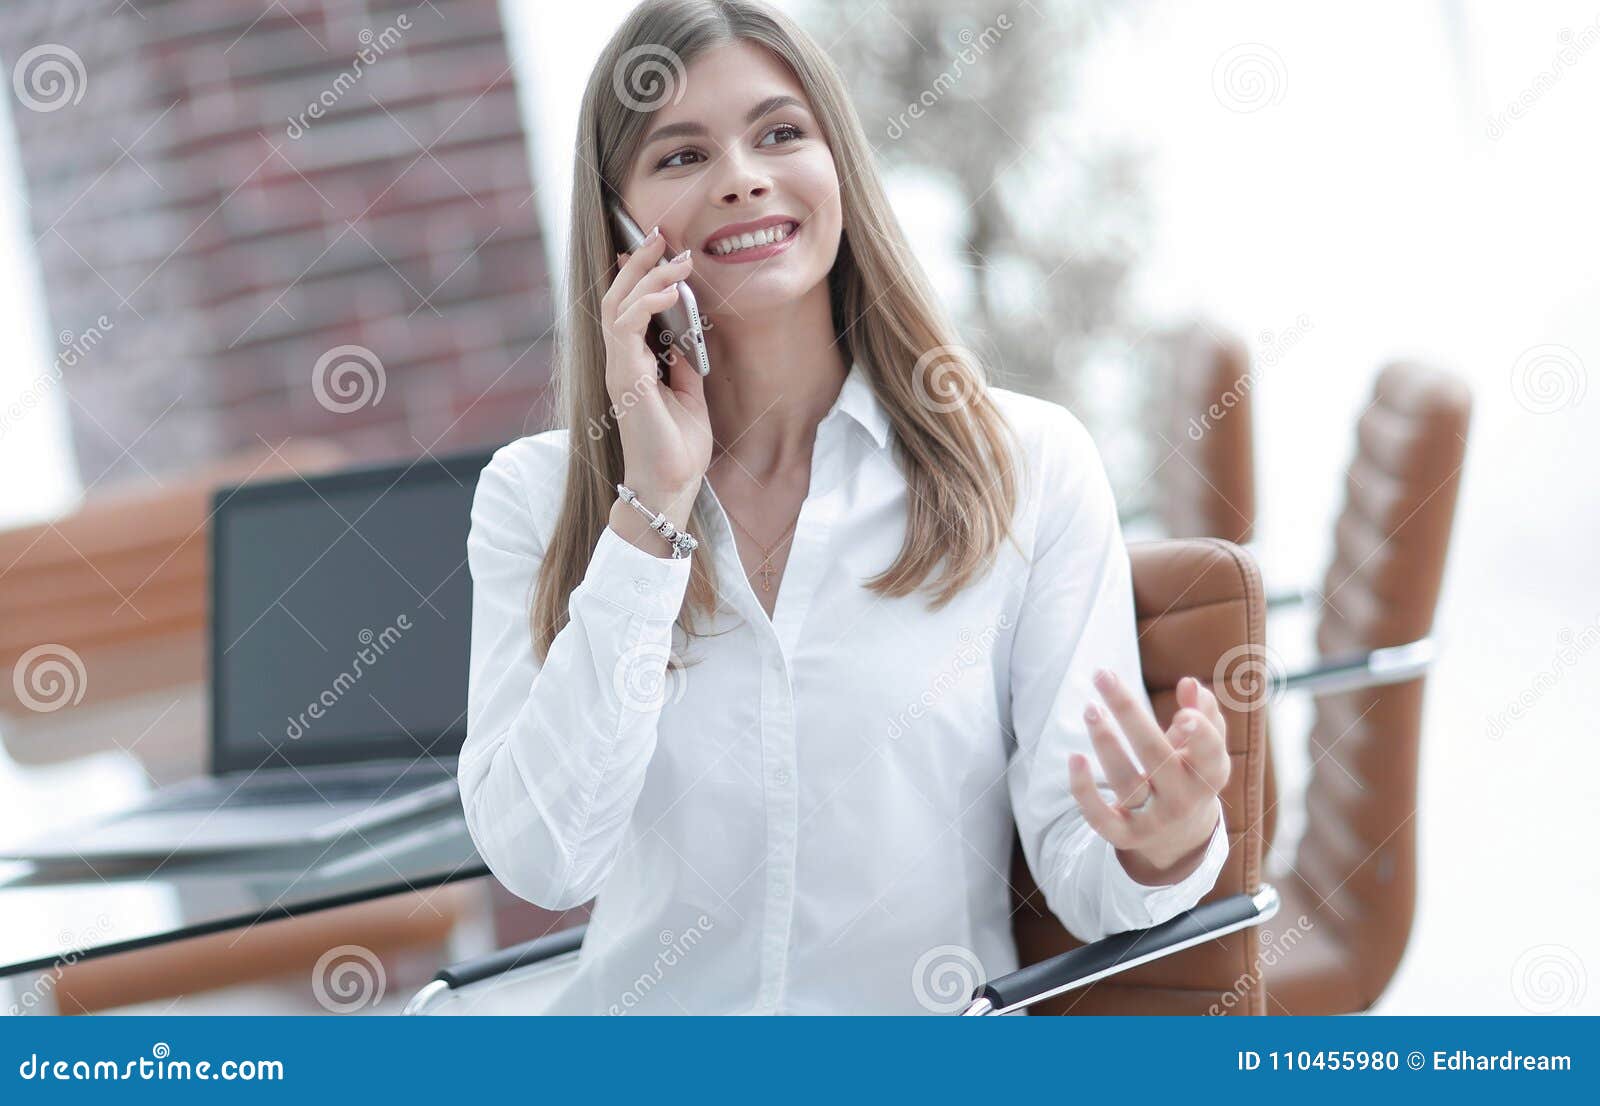 young buisnes woman talking on a mobile phone.